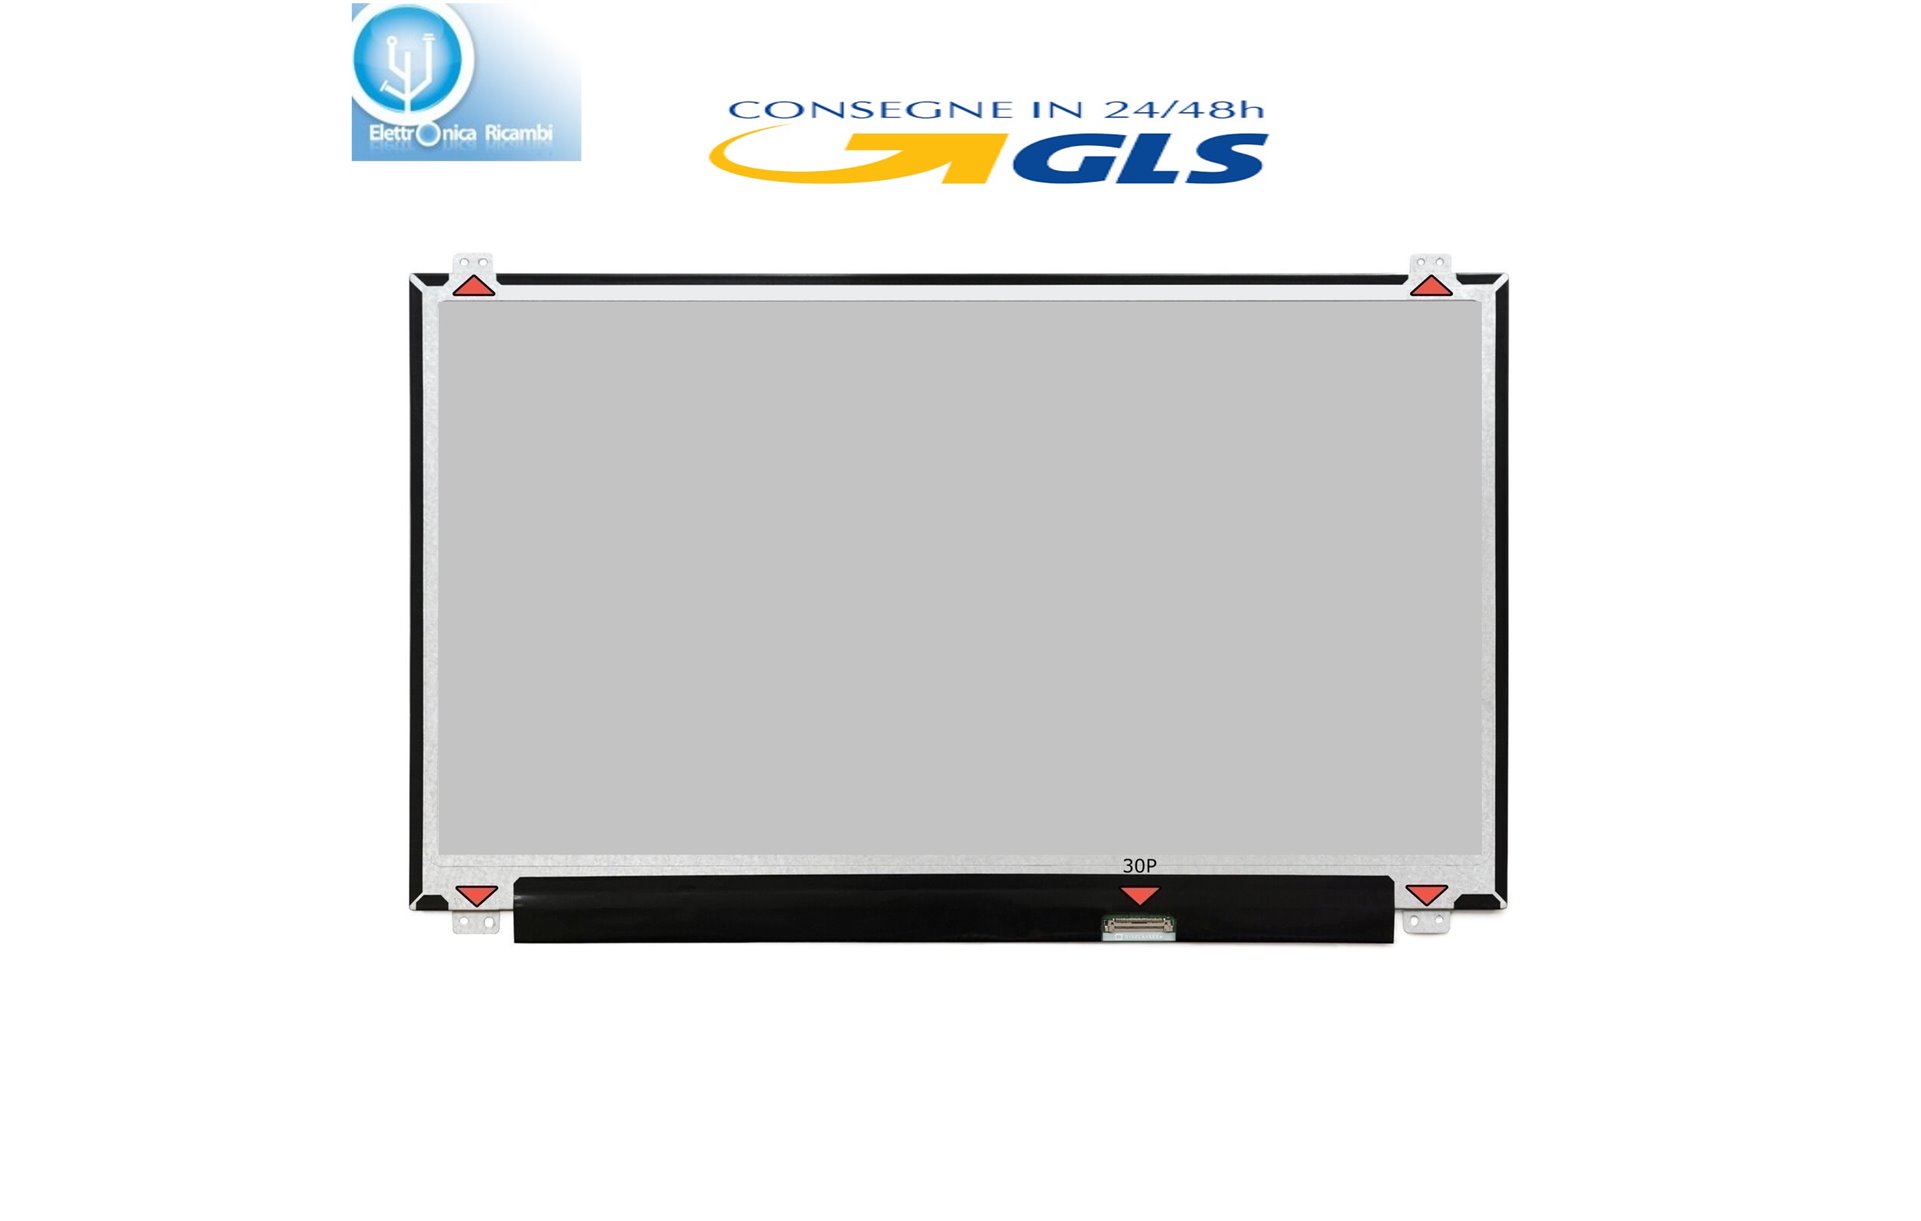 DISPLAY LCD CYBERPOWER FANGBOOK 4 SX6-200 15.6 1920x1080 LED 30 pin